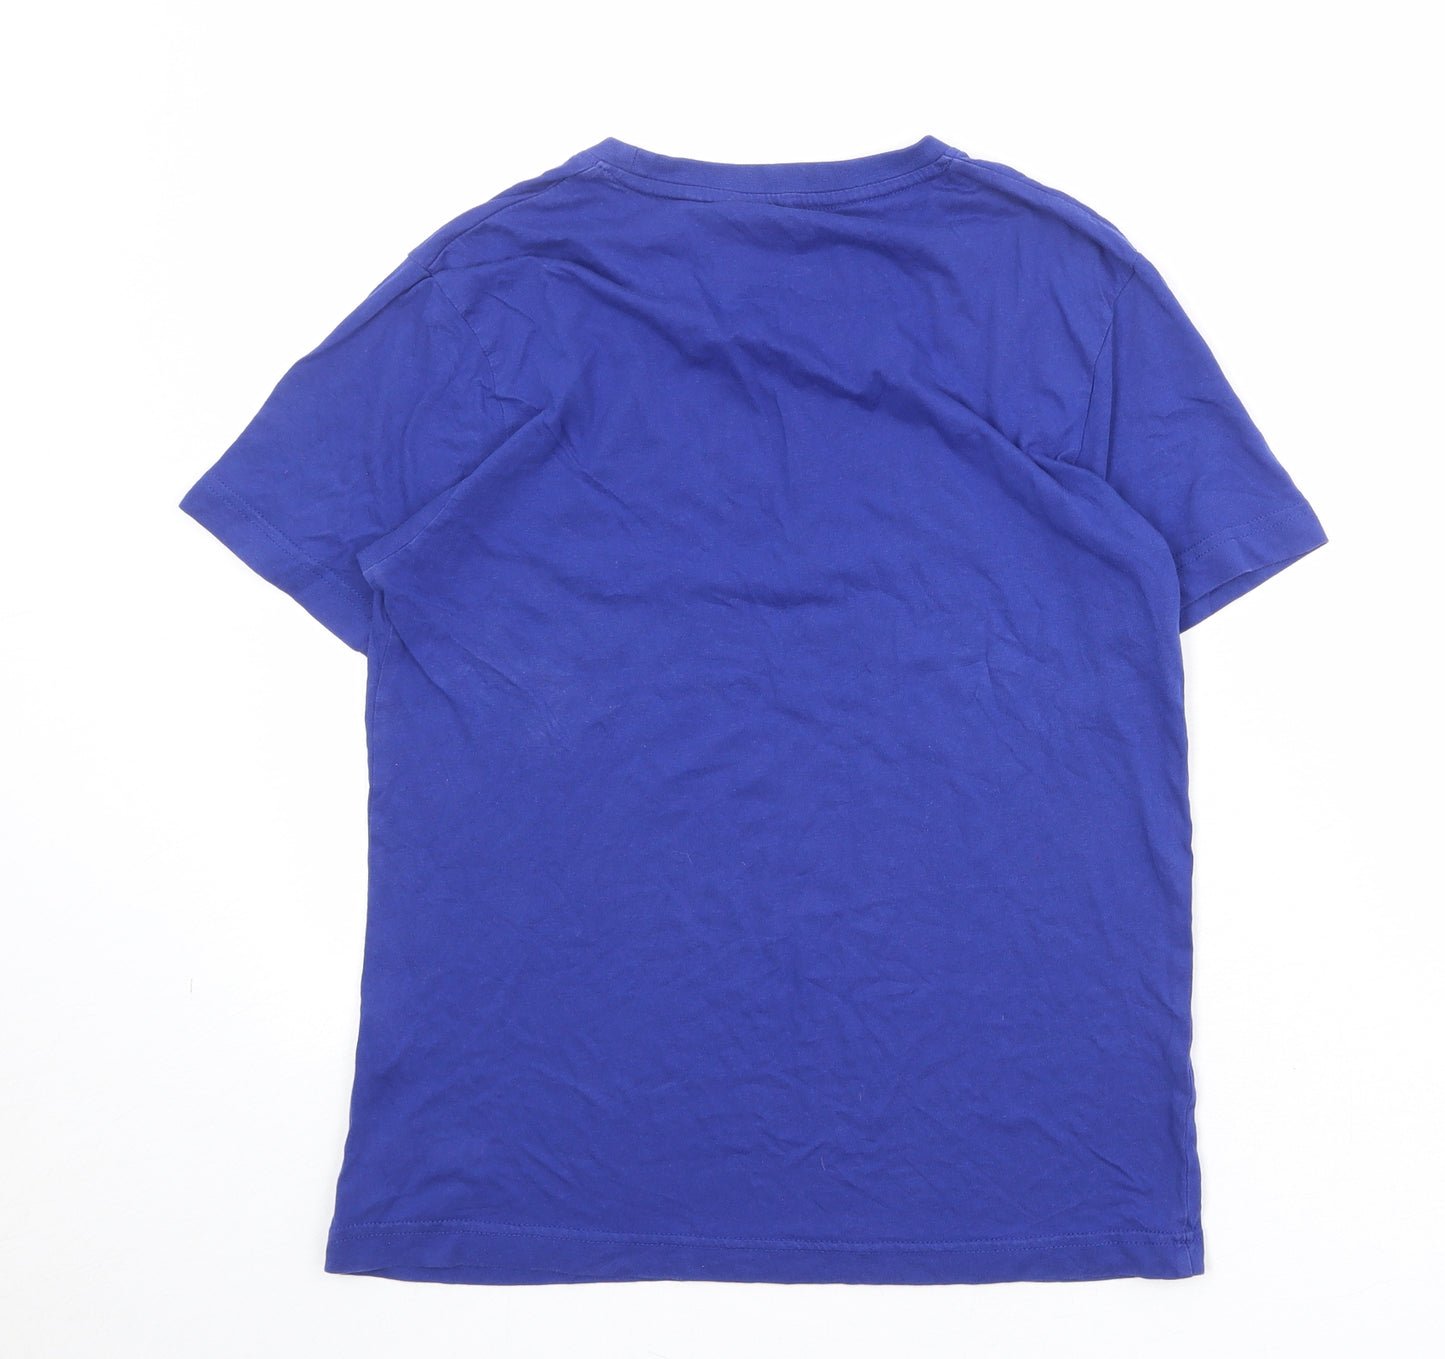 Hot Tuna Boys Blue 100% Cotton Basic T-Shirt Size 13 Years Round Neck Pullover